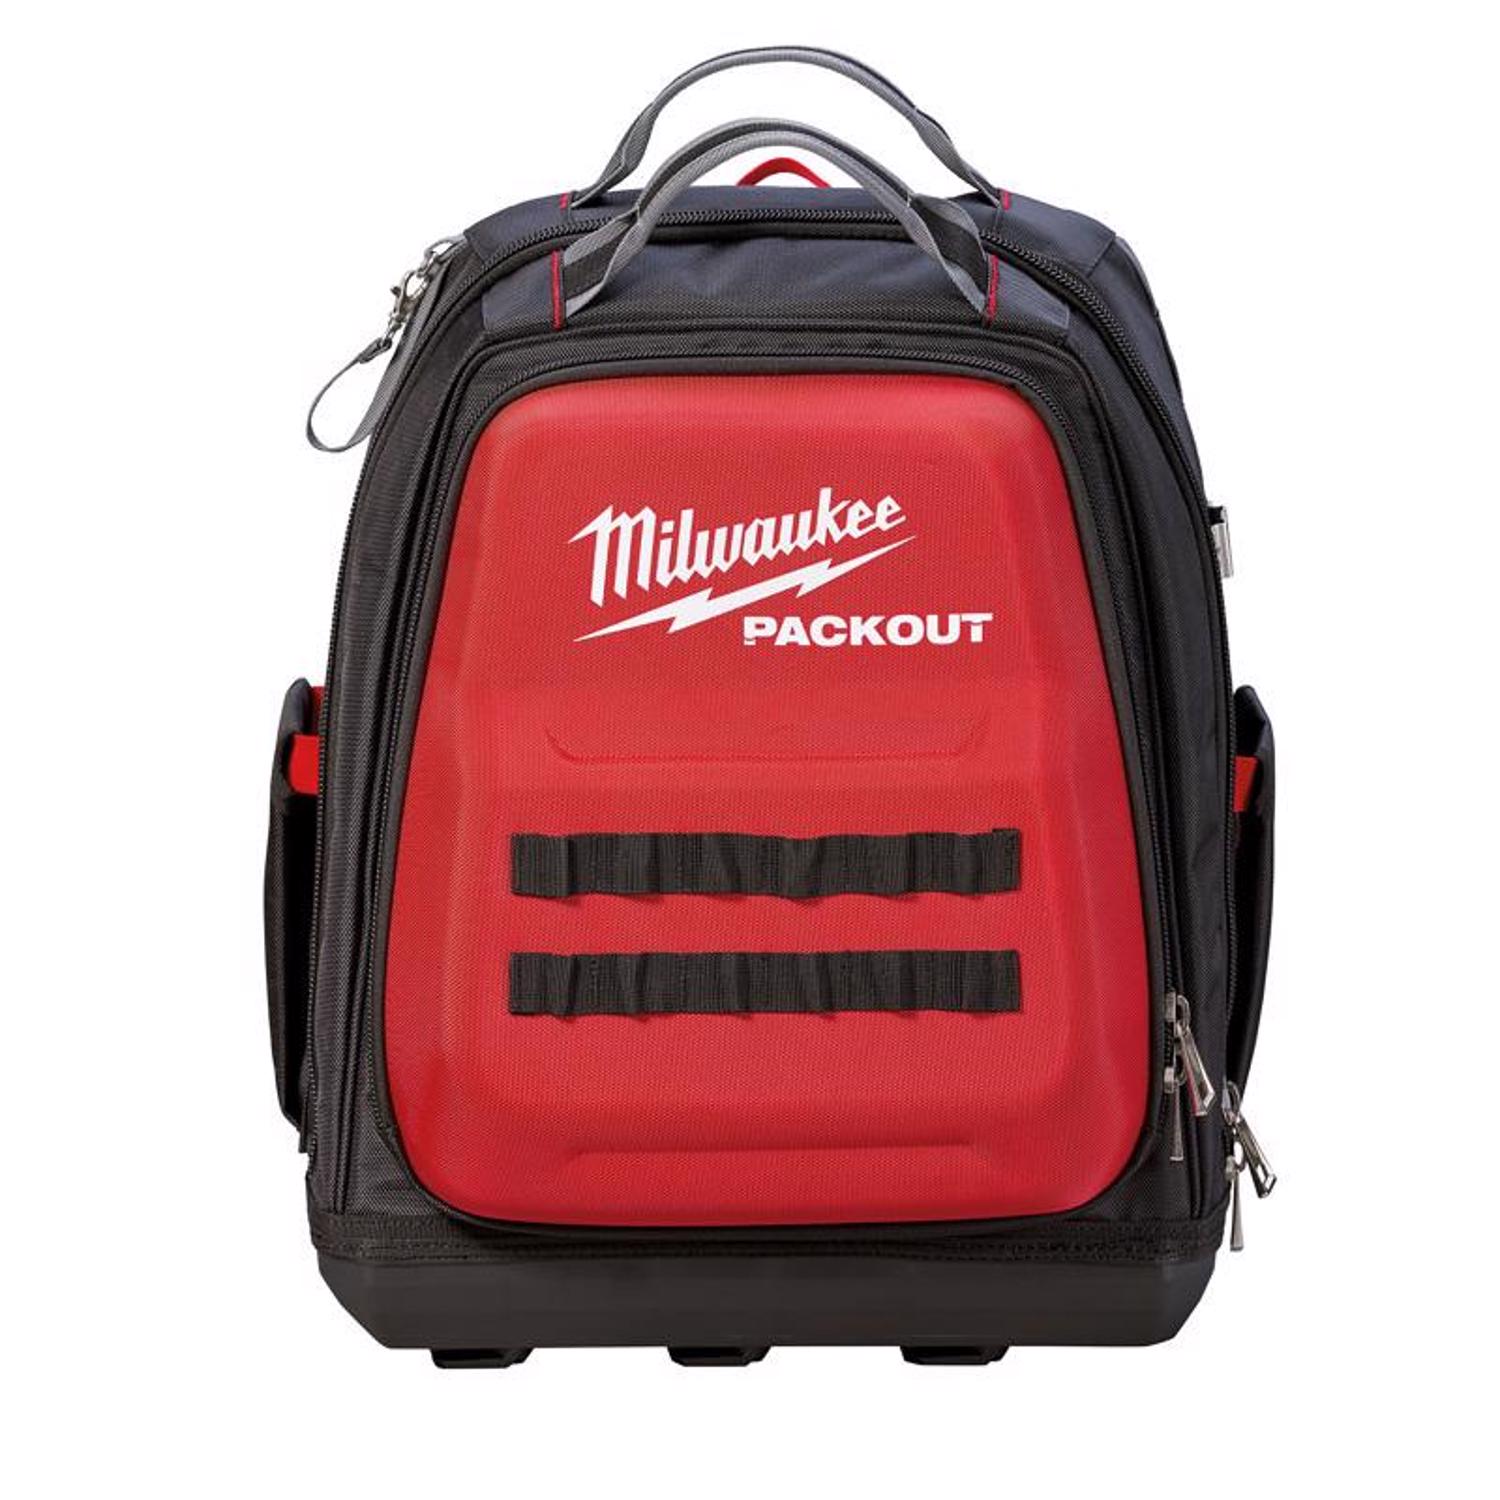 Milwaukee PACKOUT 15.75 in. W X 11.81 in. H Ballistic Nylon Cooler Utility  Bag 6 pocket Black/Red 1 - Ace Hardware